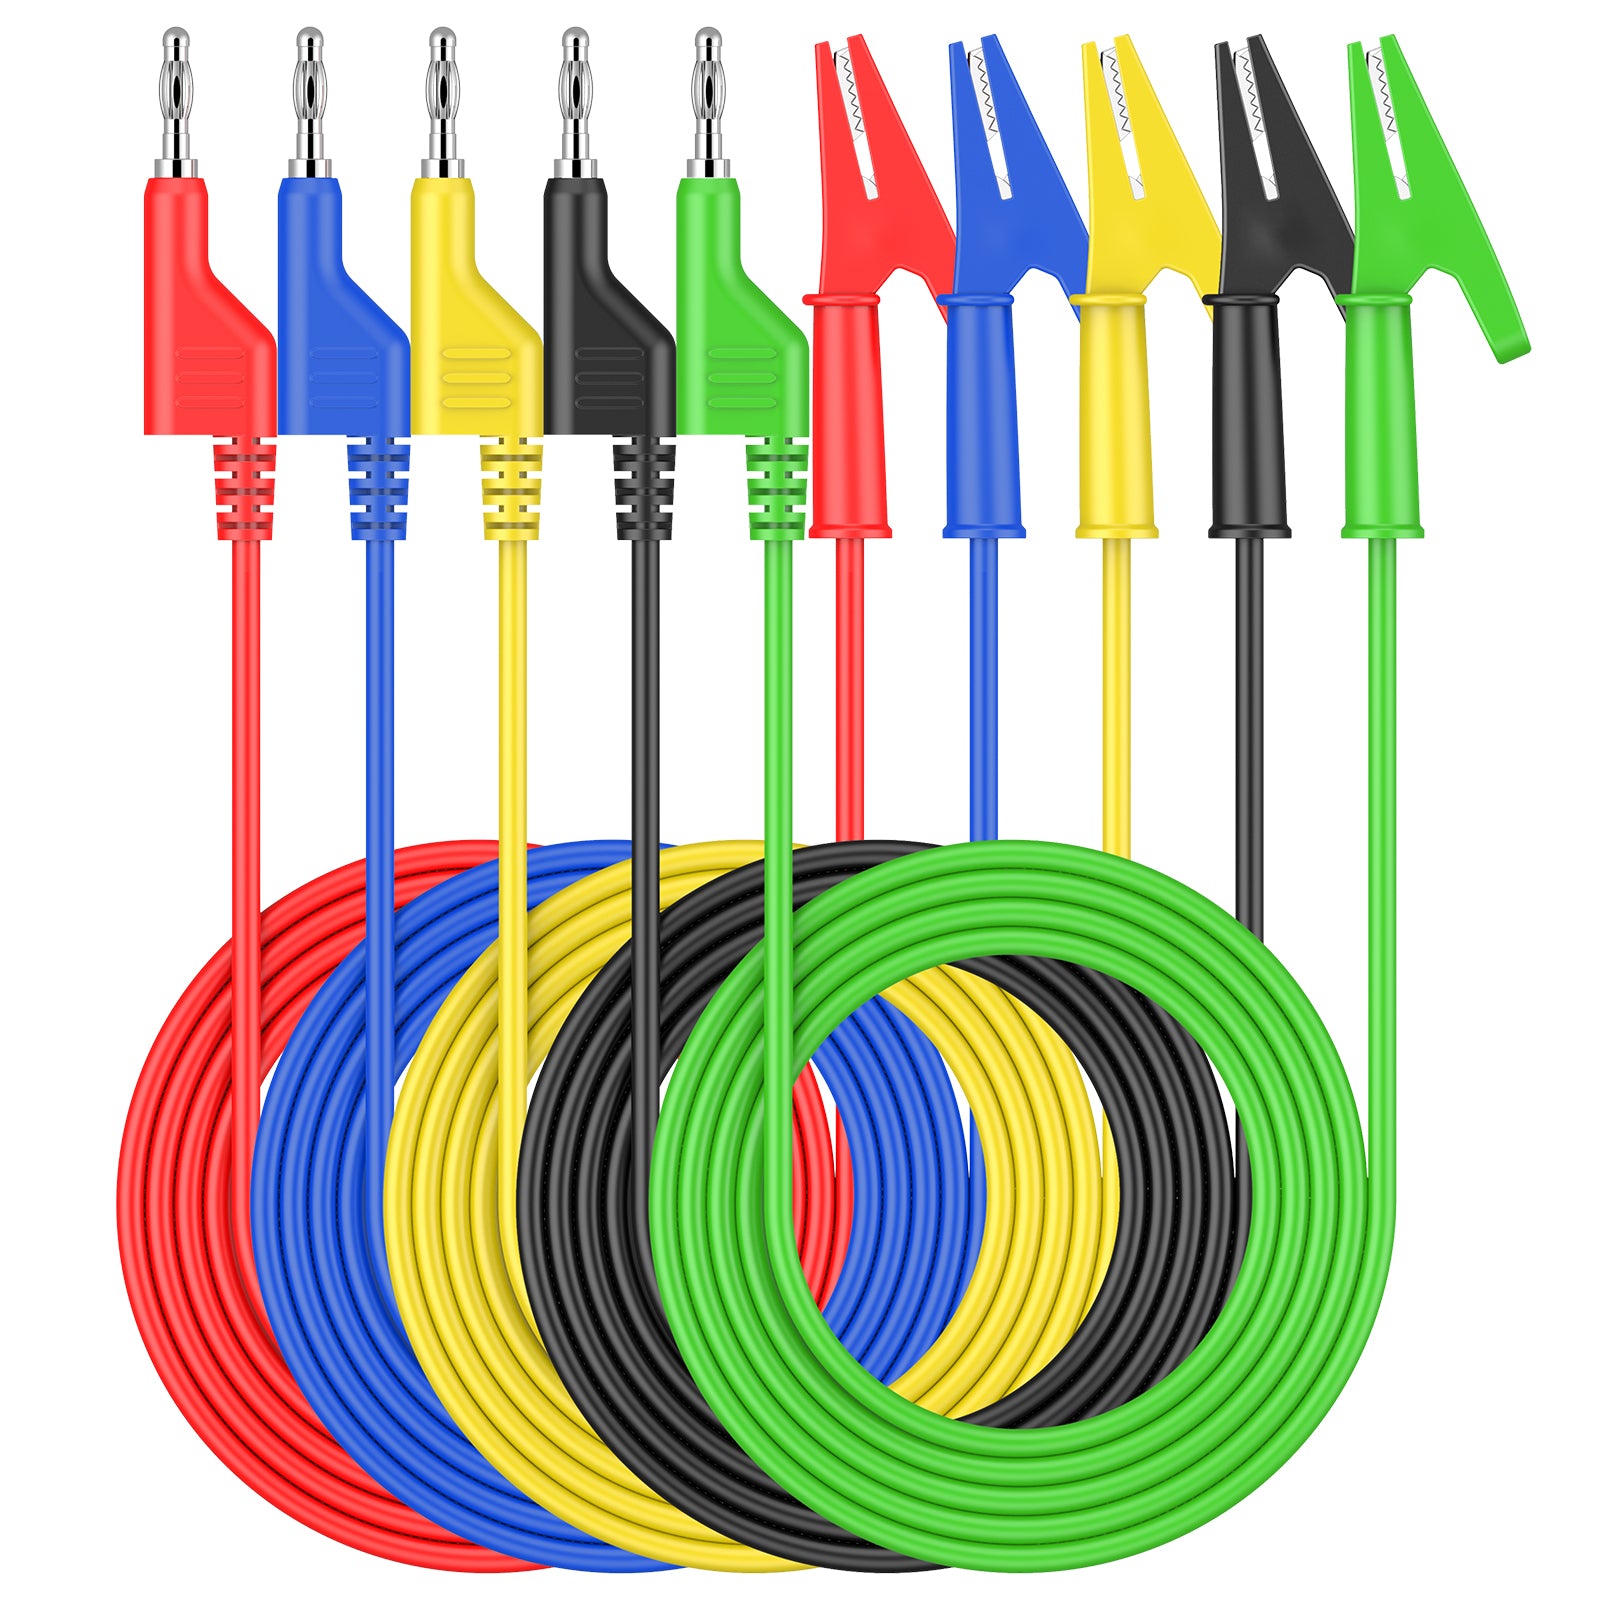 Proster 5PCS Test Leads 4mm Stackable Banana Plug